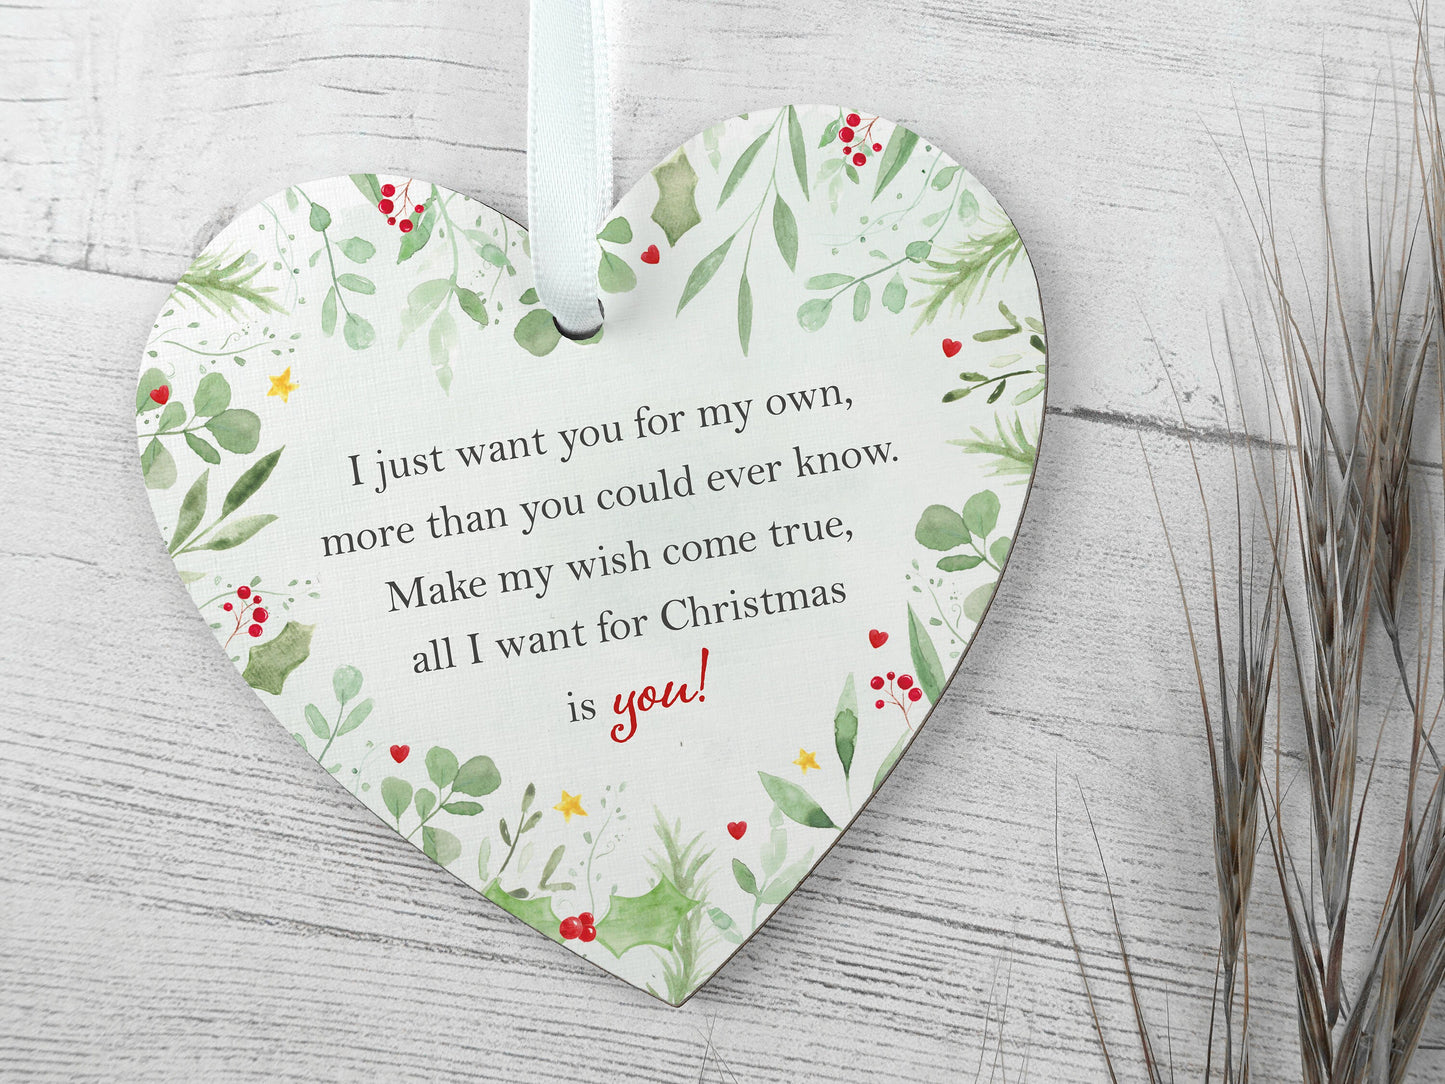 Stocking filler for girlfriend or wife | Handmade wooden heart | Christmas present | Romantic small gift for her LC063